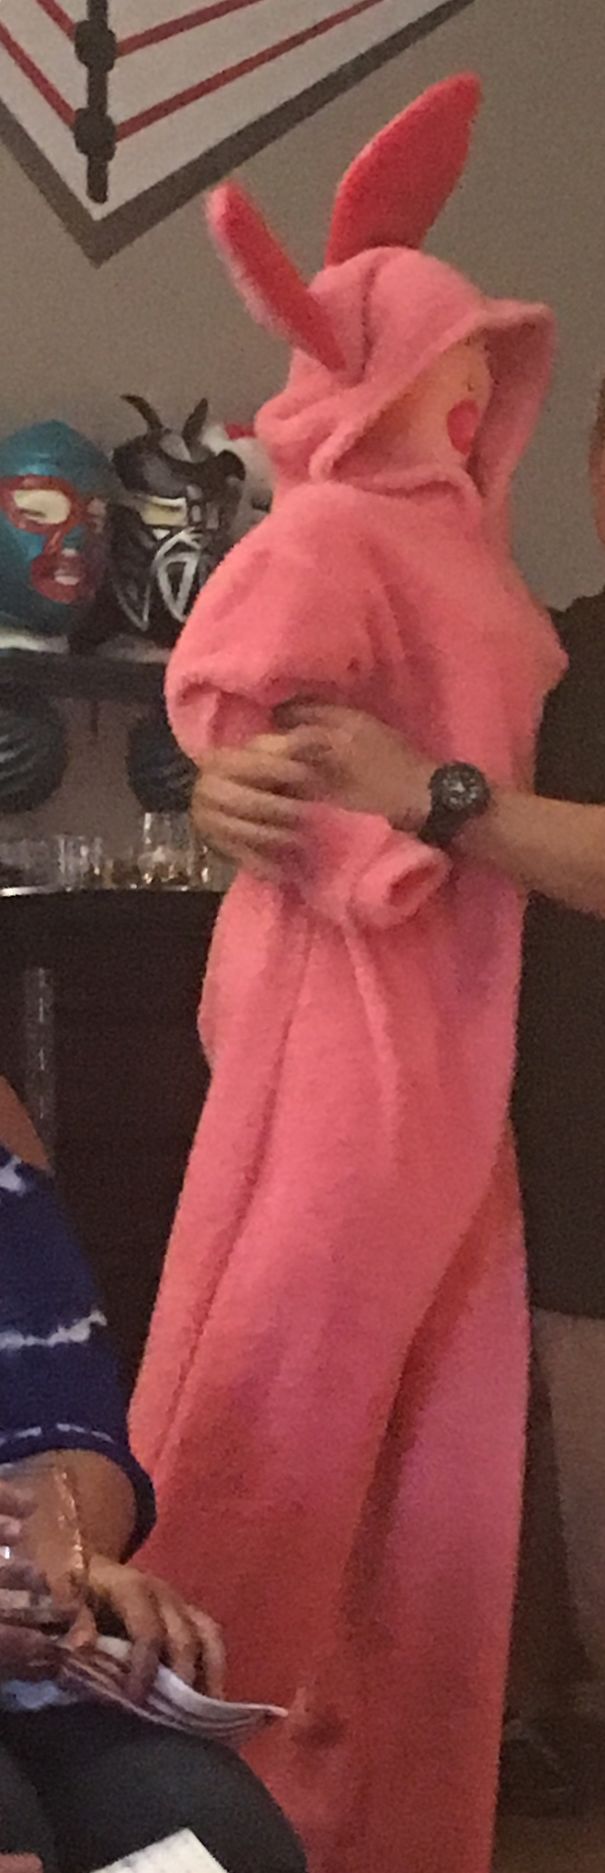 Someone Put A Blowup Doll In The White Elephant Exchange... There Were Kids Present So We Put Her In The Bunny Suit From A Christmas Story.